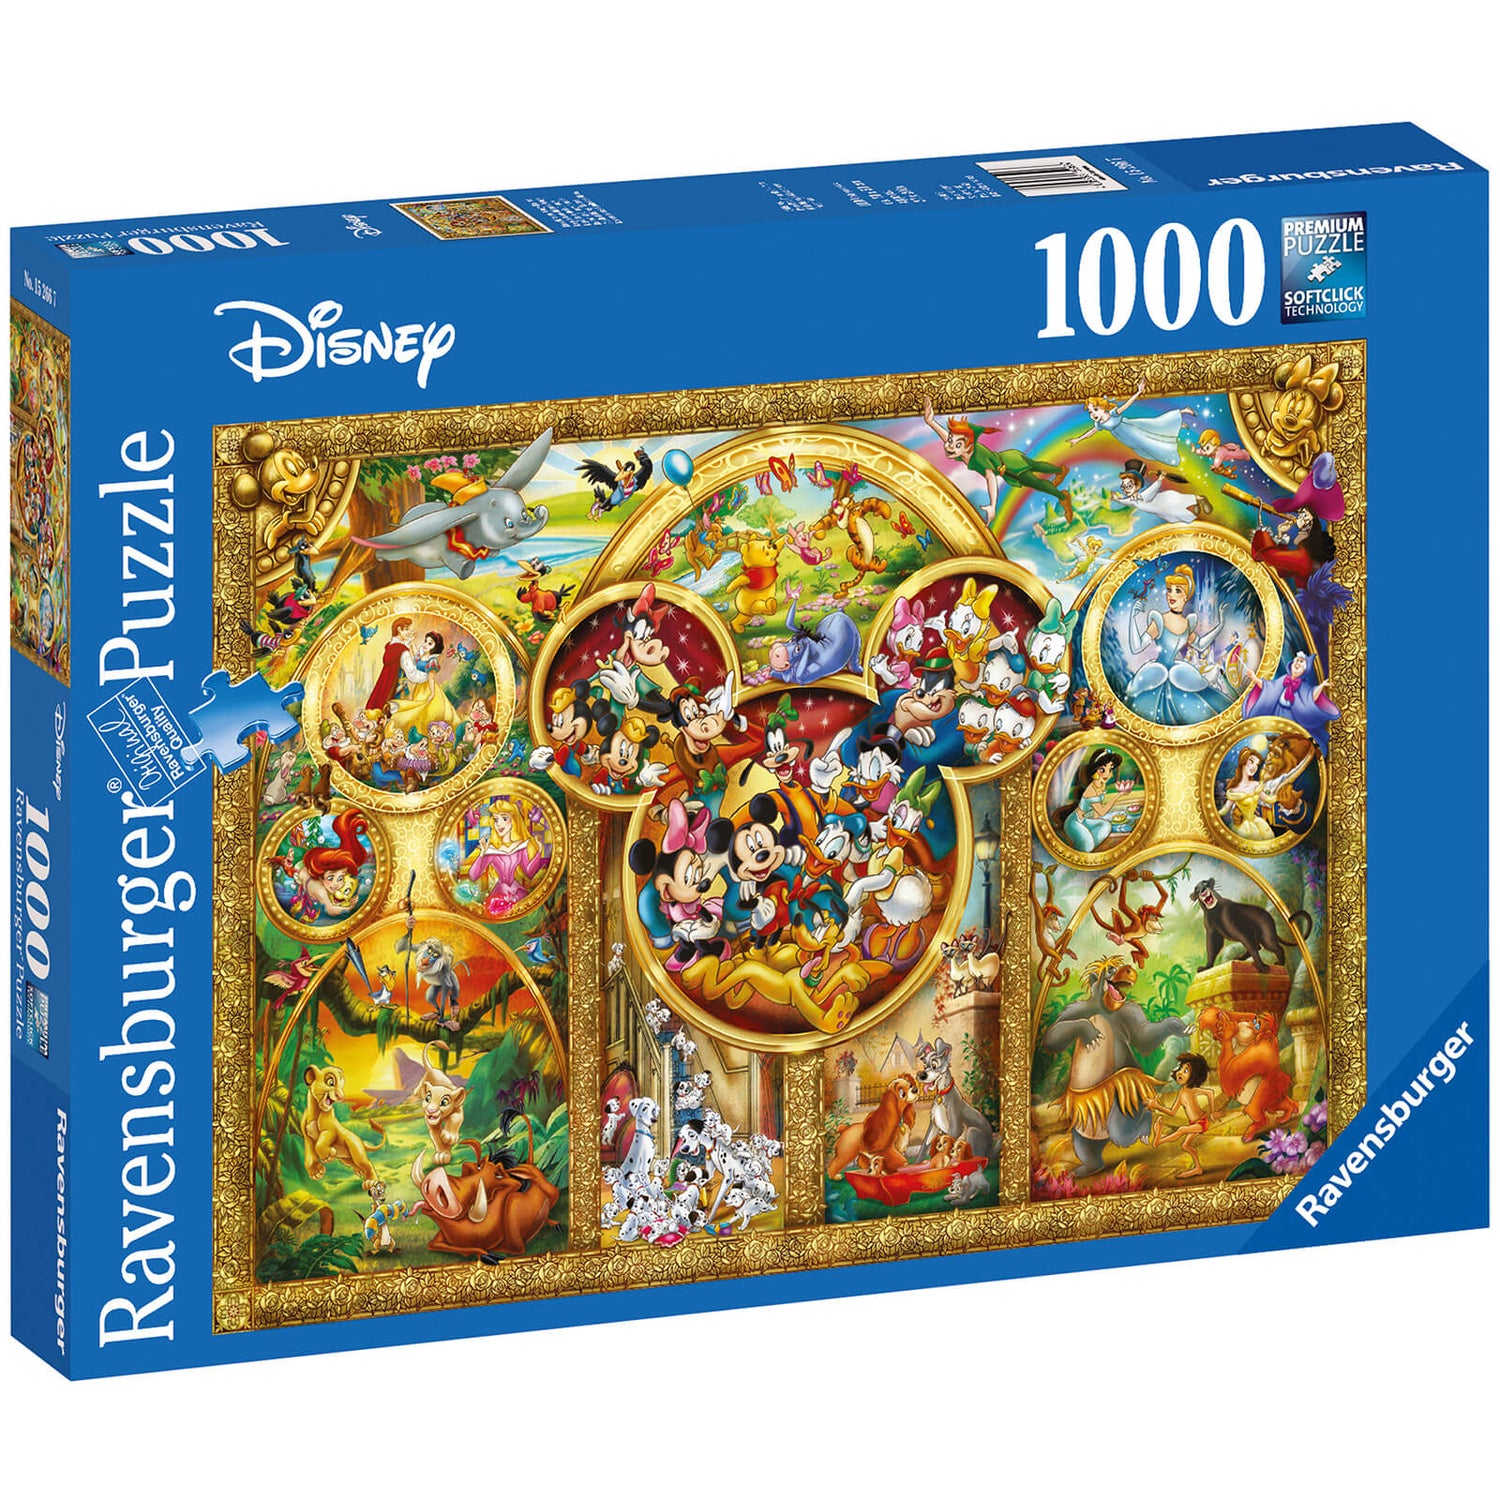 The Best Disney Themes Jigsaw Puzzle (1000 Pieces)